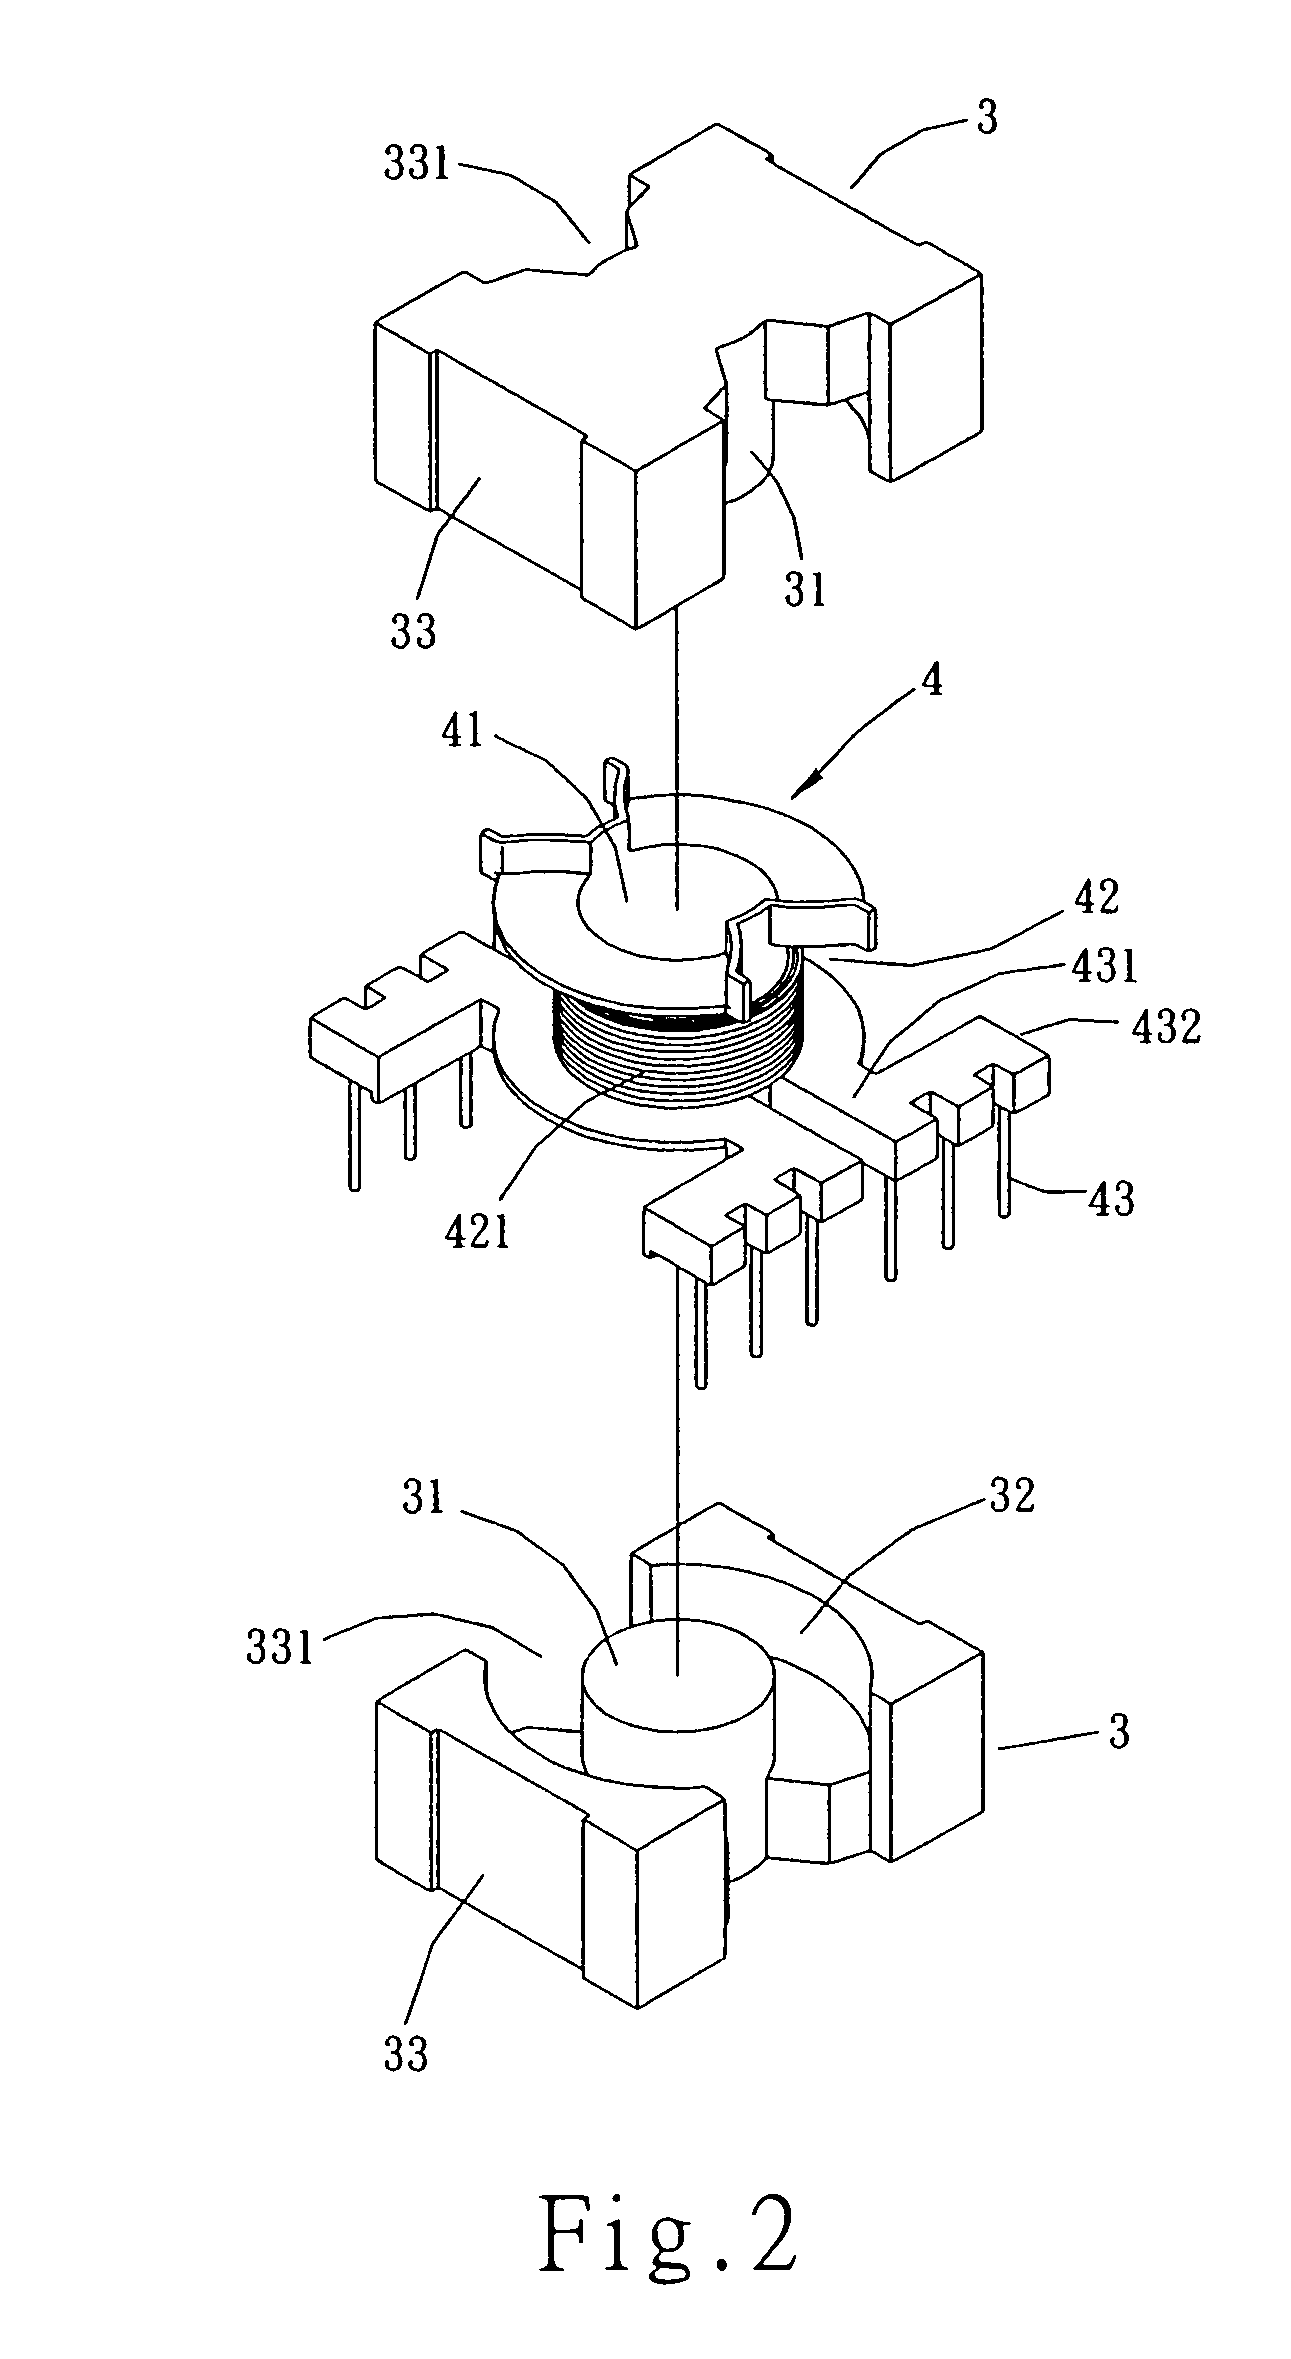 Structure of inductance core and wire frame